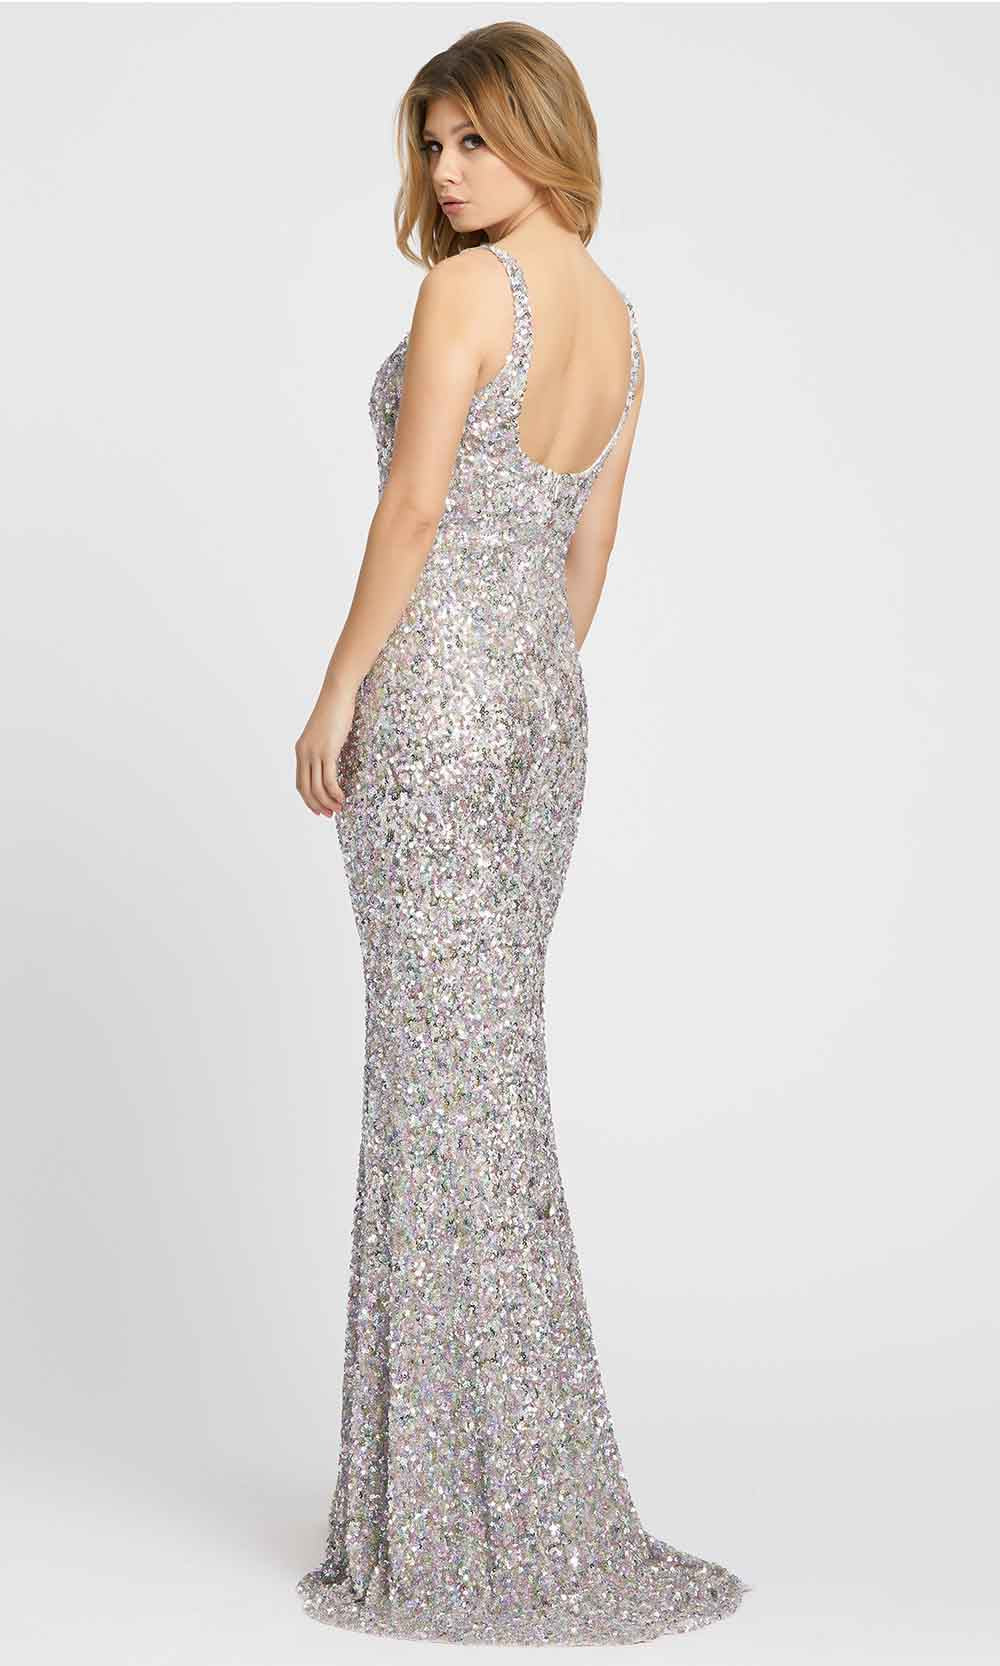 Ieena Duggal - 26469I Sleeveless Sequins Sheath Evening Gown in Silver and Gray 